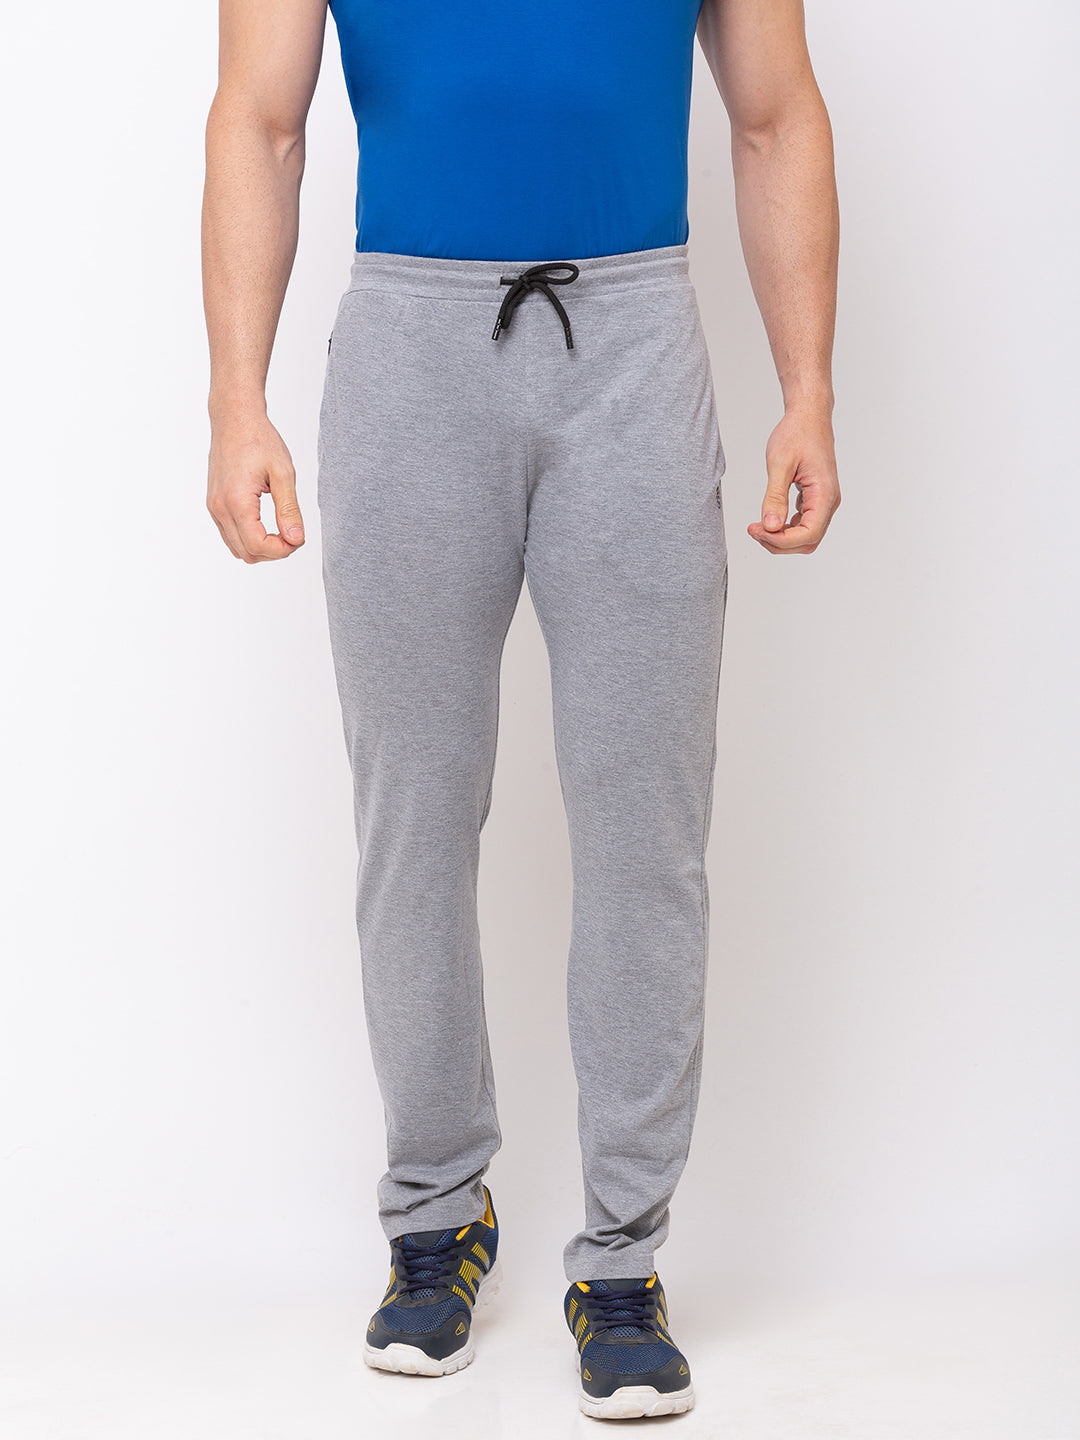 track pants for plus size